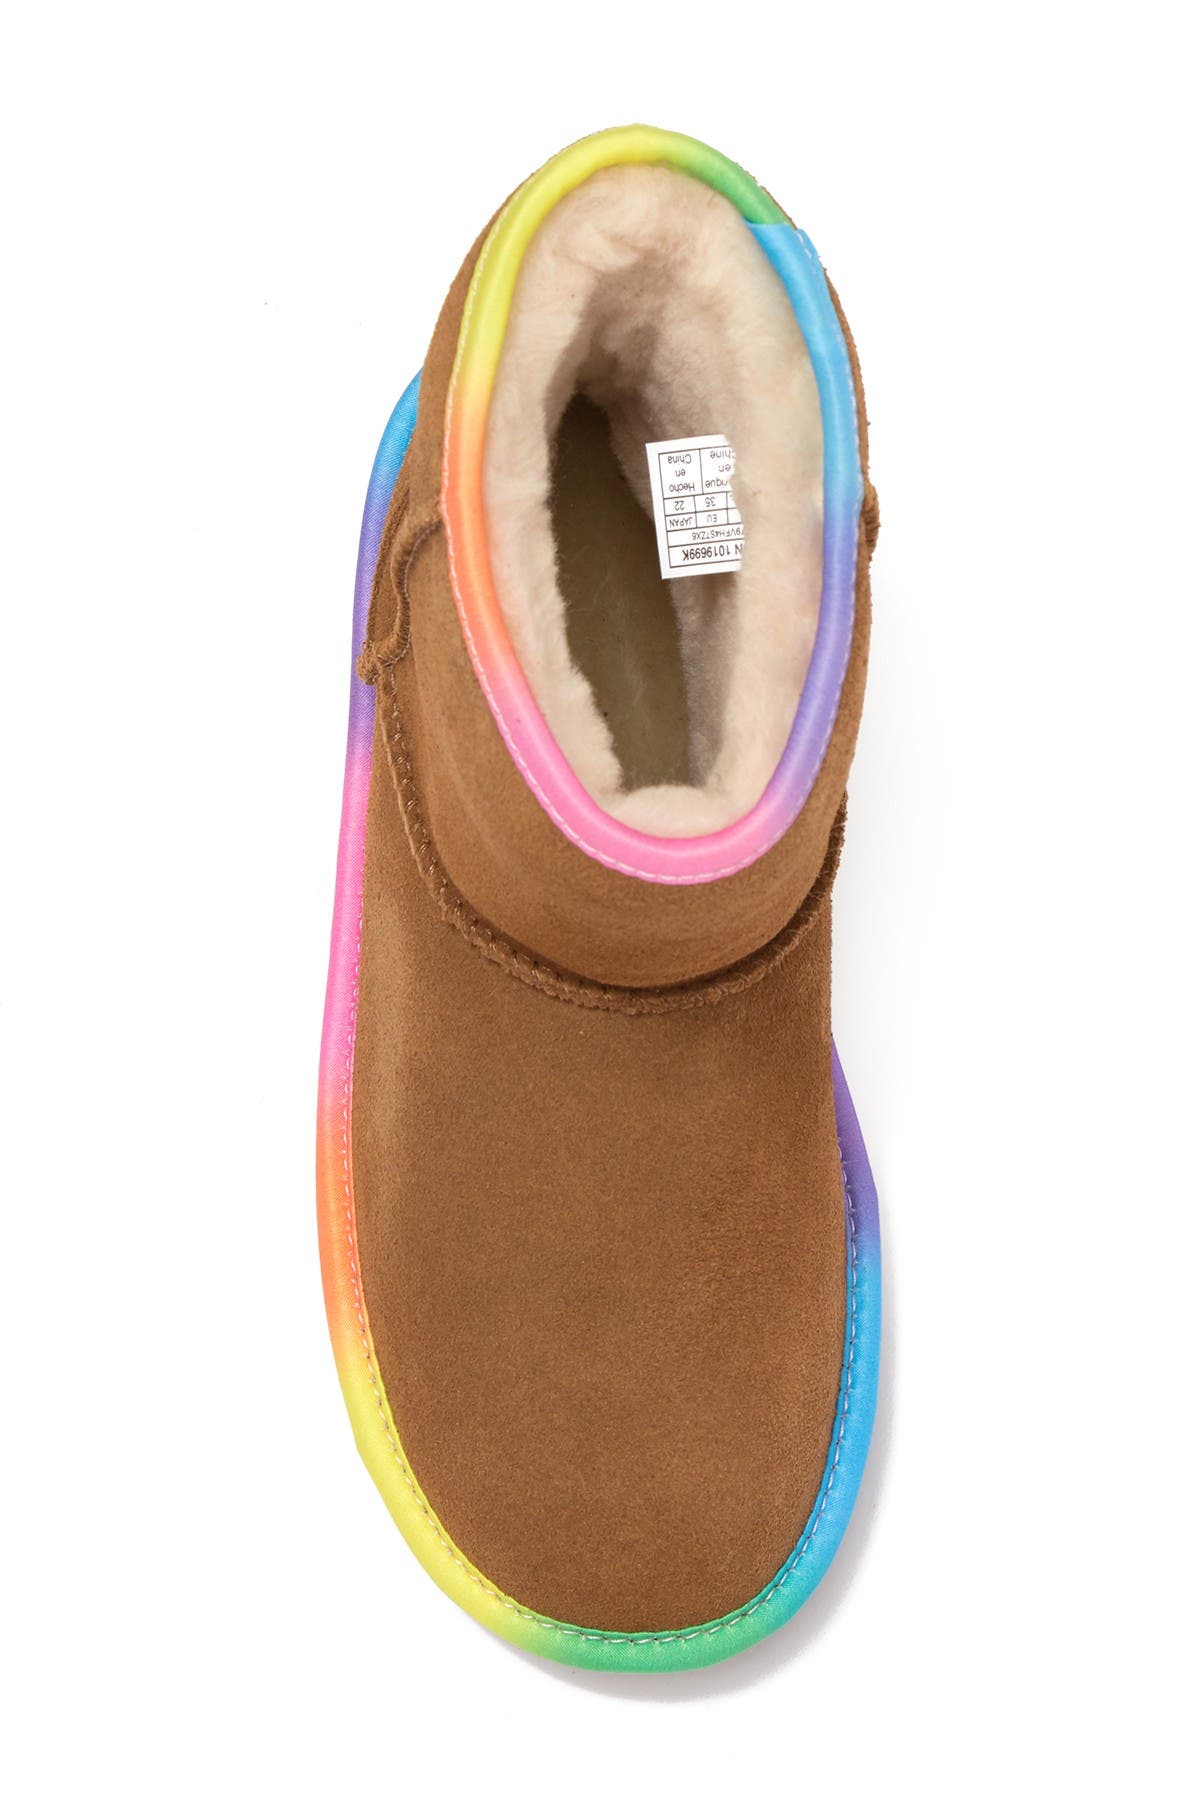 ugg rainbow boots toddler